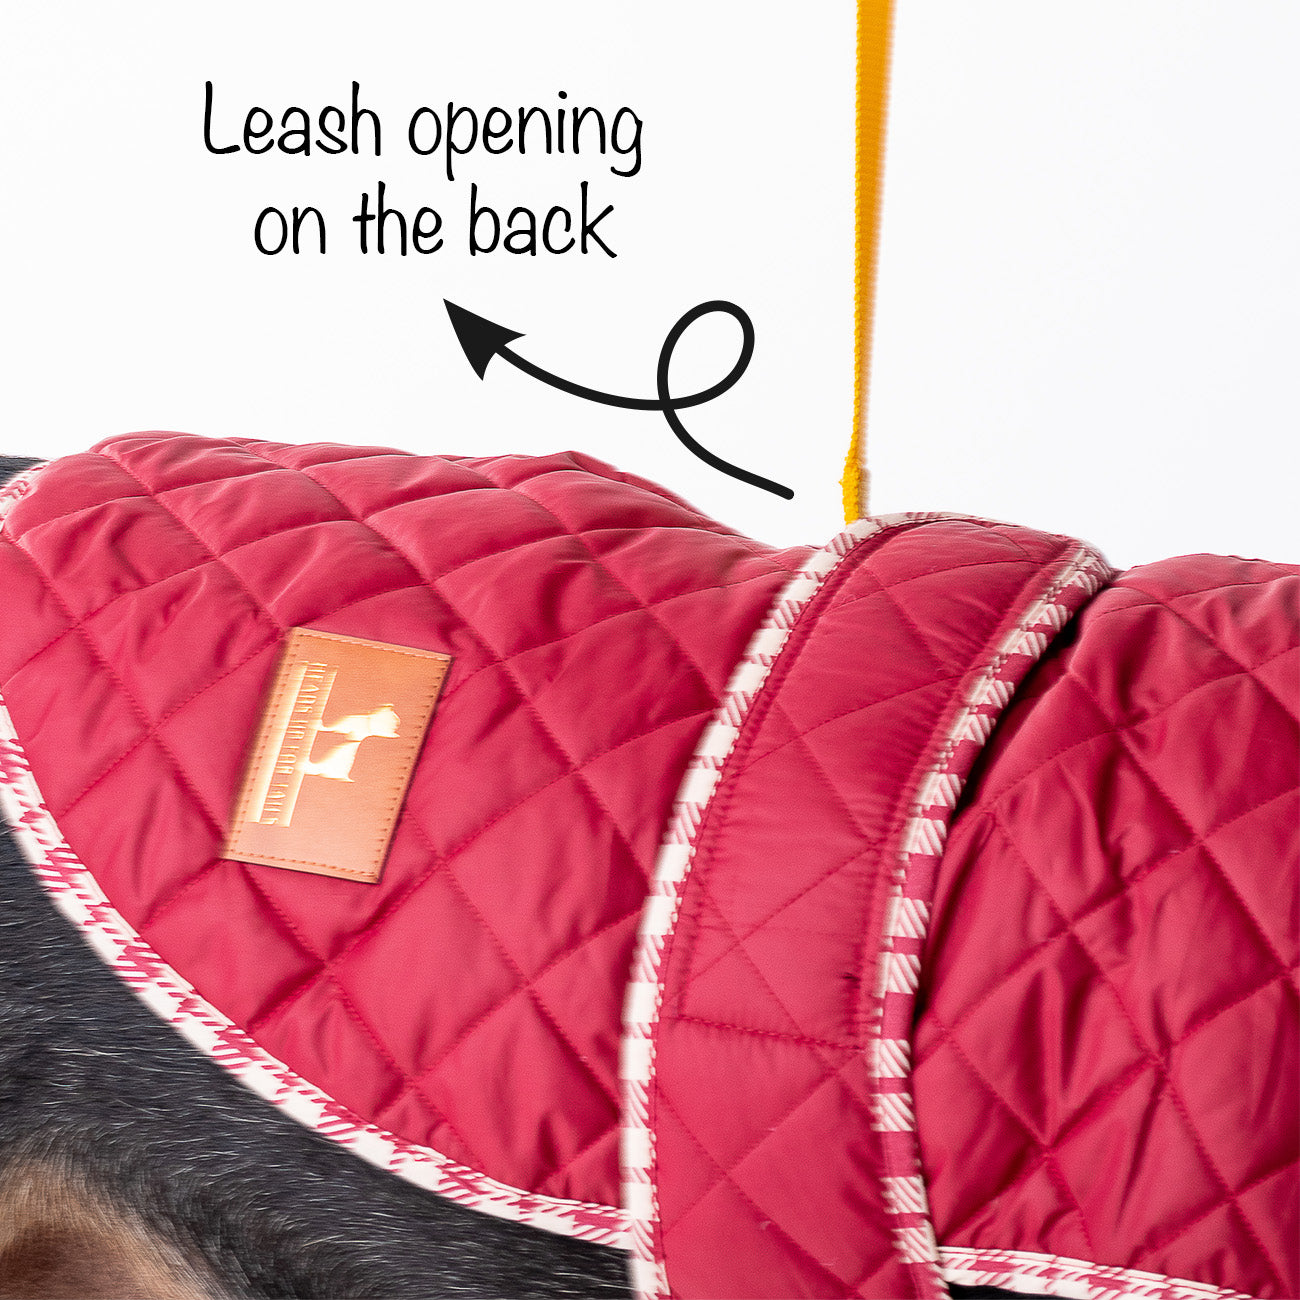 HUFT Grrberry Quilted Dog Jacket- Burnt Red - Heads Up For Tails